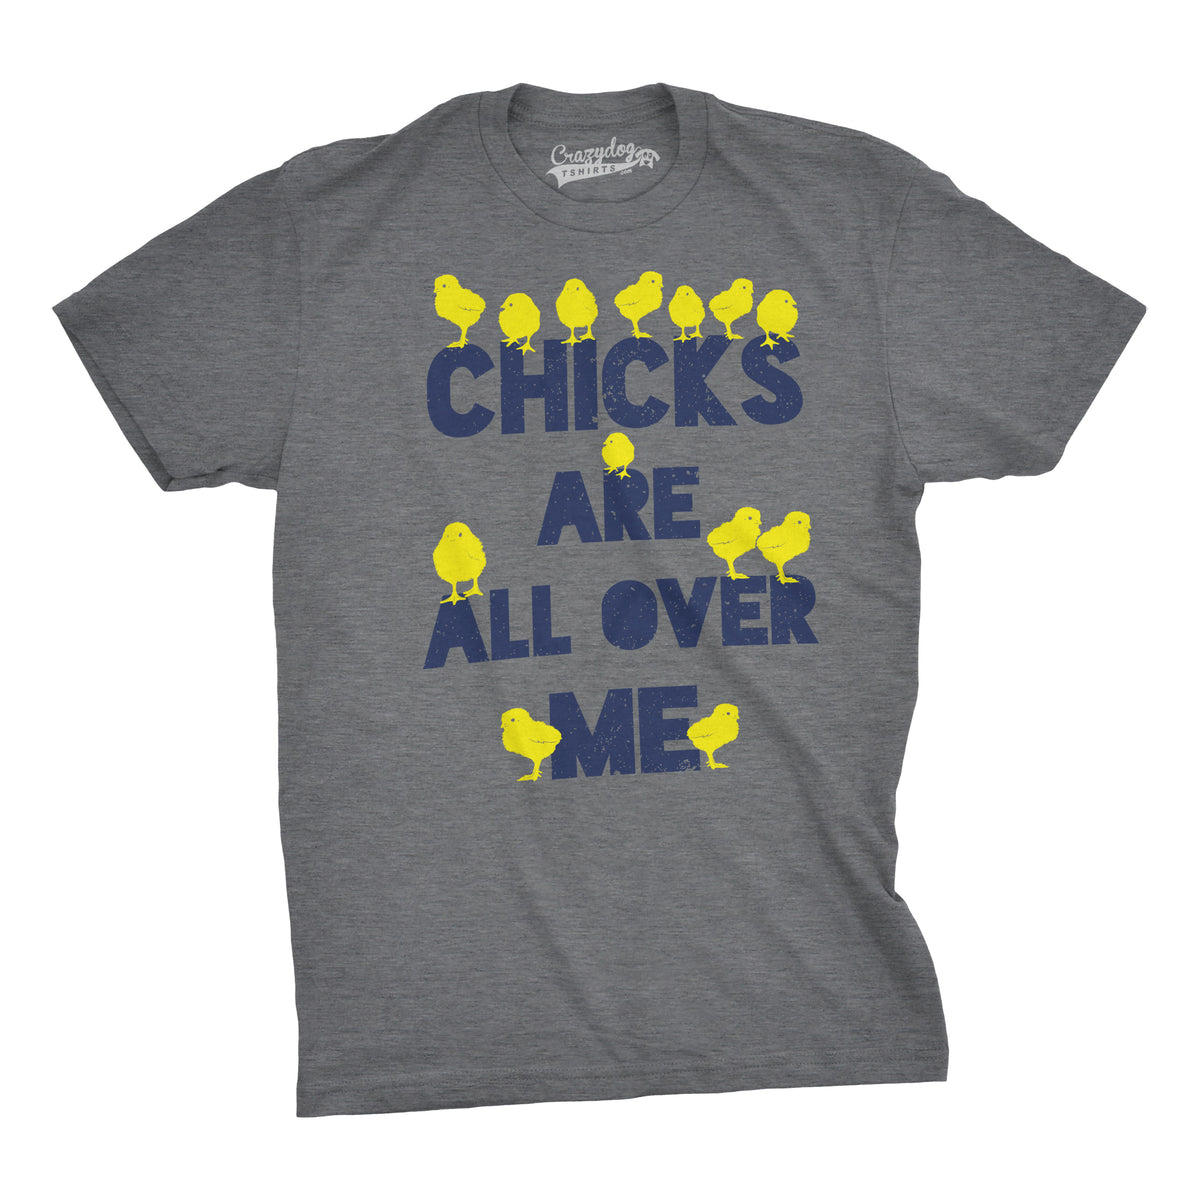 Funny Dark Heather Grey Chicks Are All Over Me Mens T Shirt Nerdy Easter sex Tee